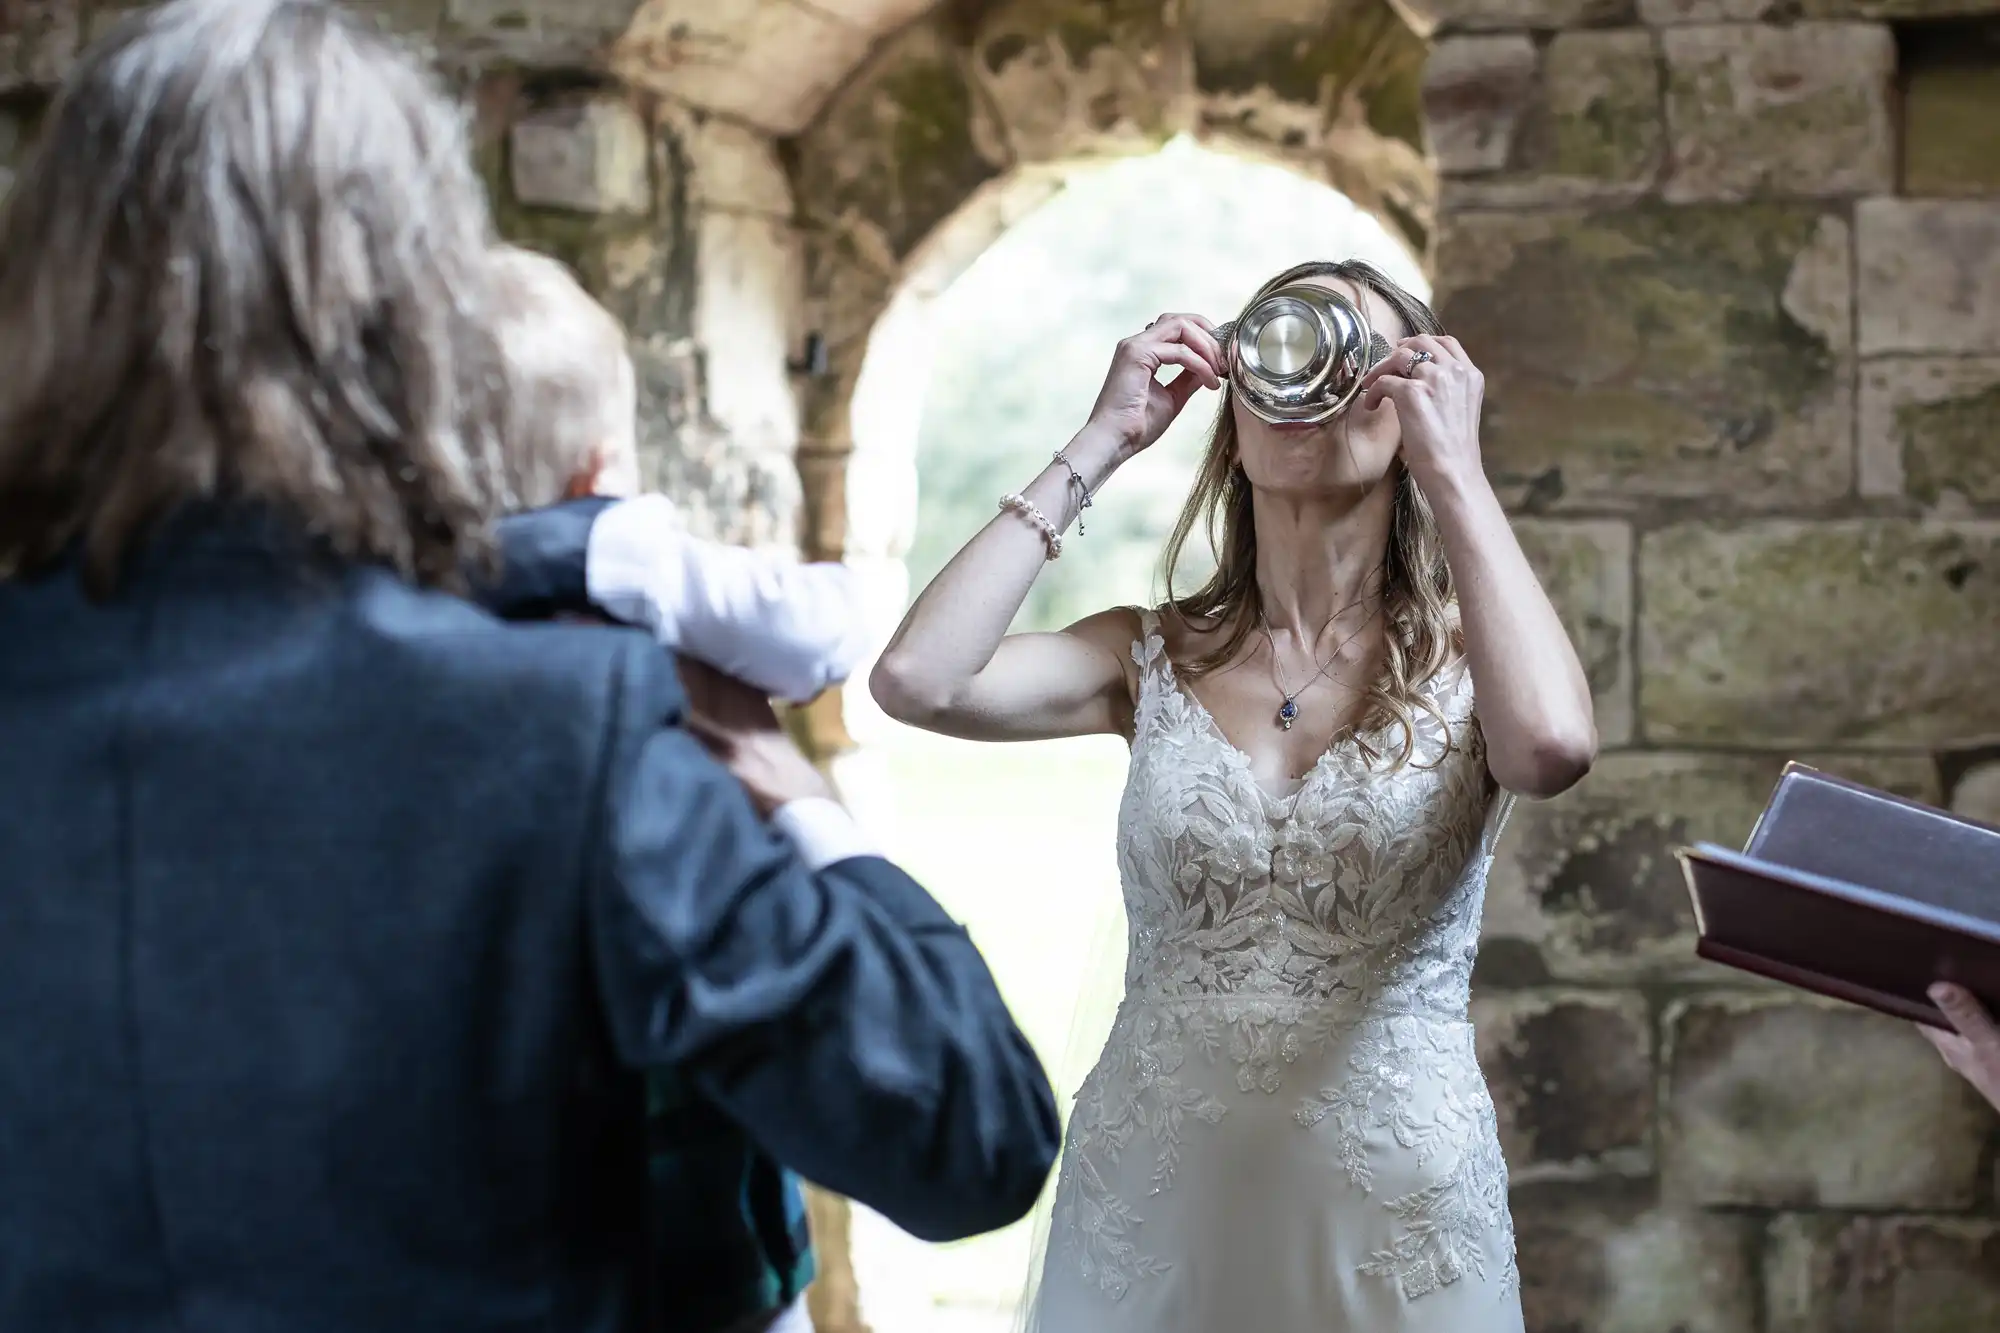 A bride in a wedding dress drinks from a metal cup, while a man holding a child looks on in what appears to be a rustic stone building.